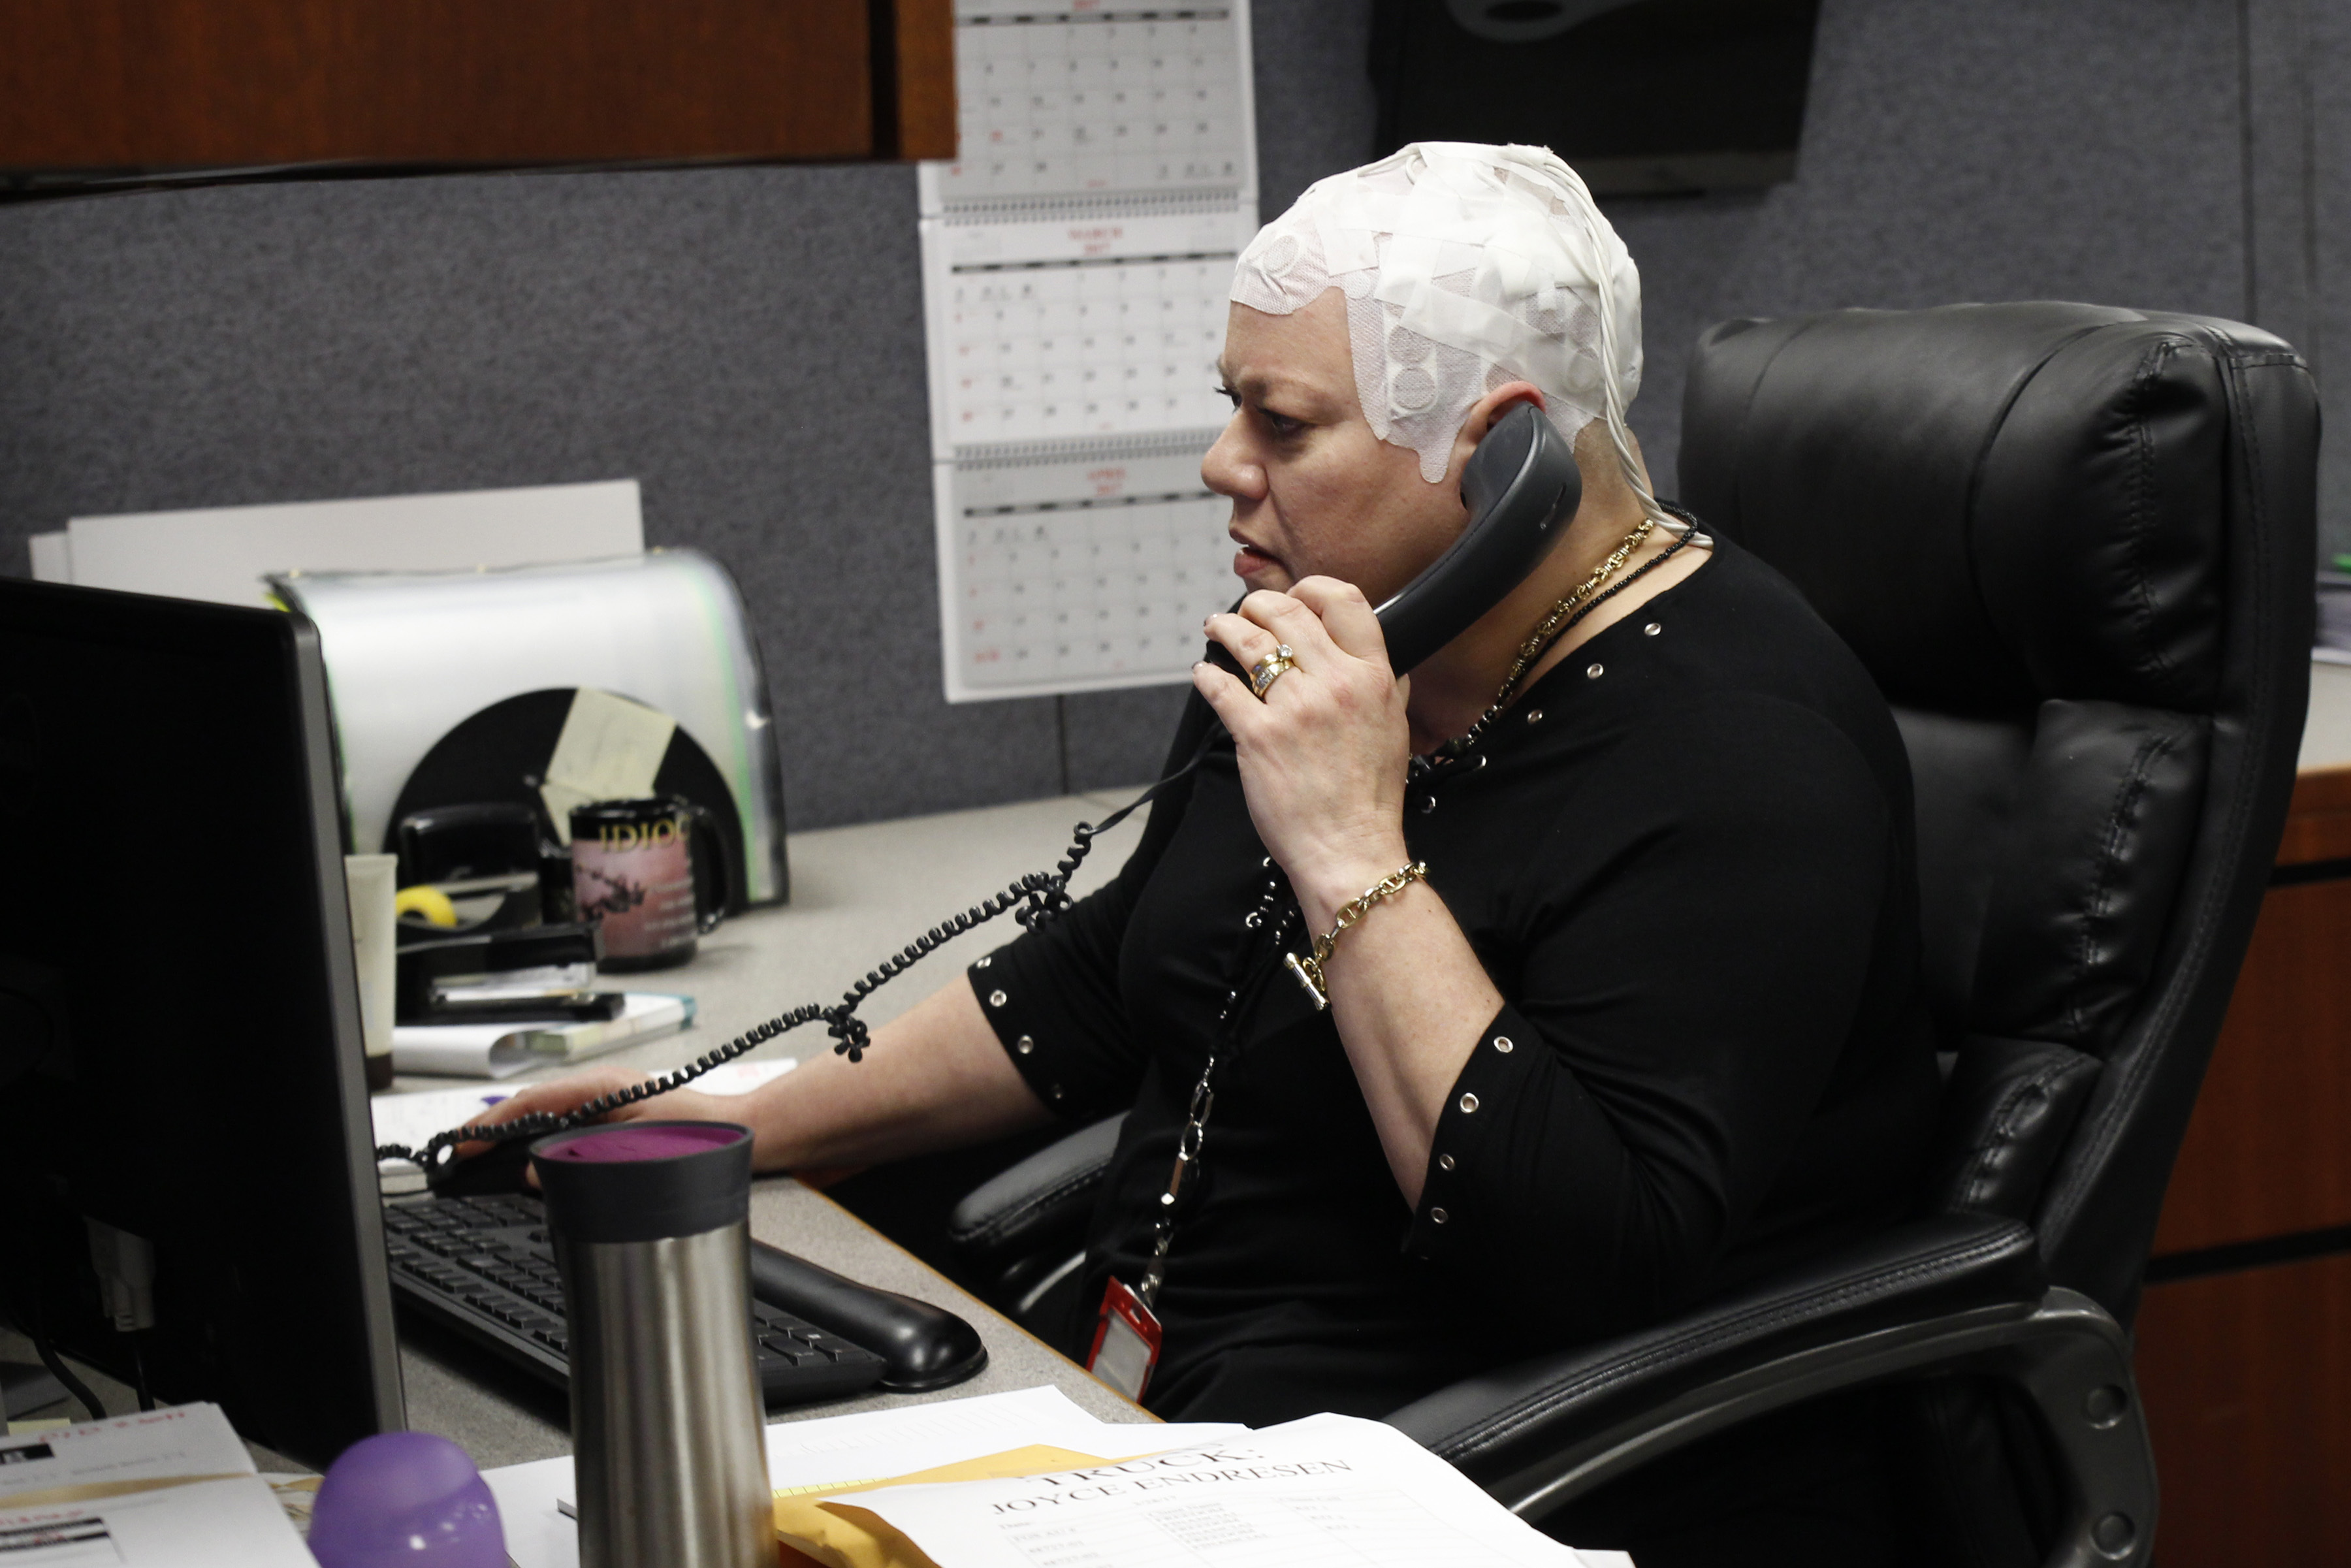 In this March 29, 2017 photo, Joyce Endresen wears an Optune therapy device for brain cancer, as she speaks on a phone at work in Aurora, Ill. (AP Photo/Carrie Antlfinger)